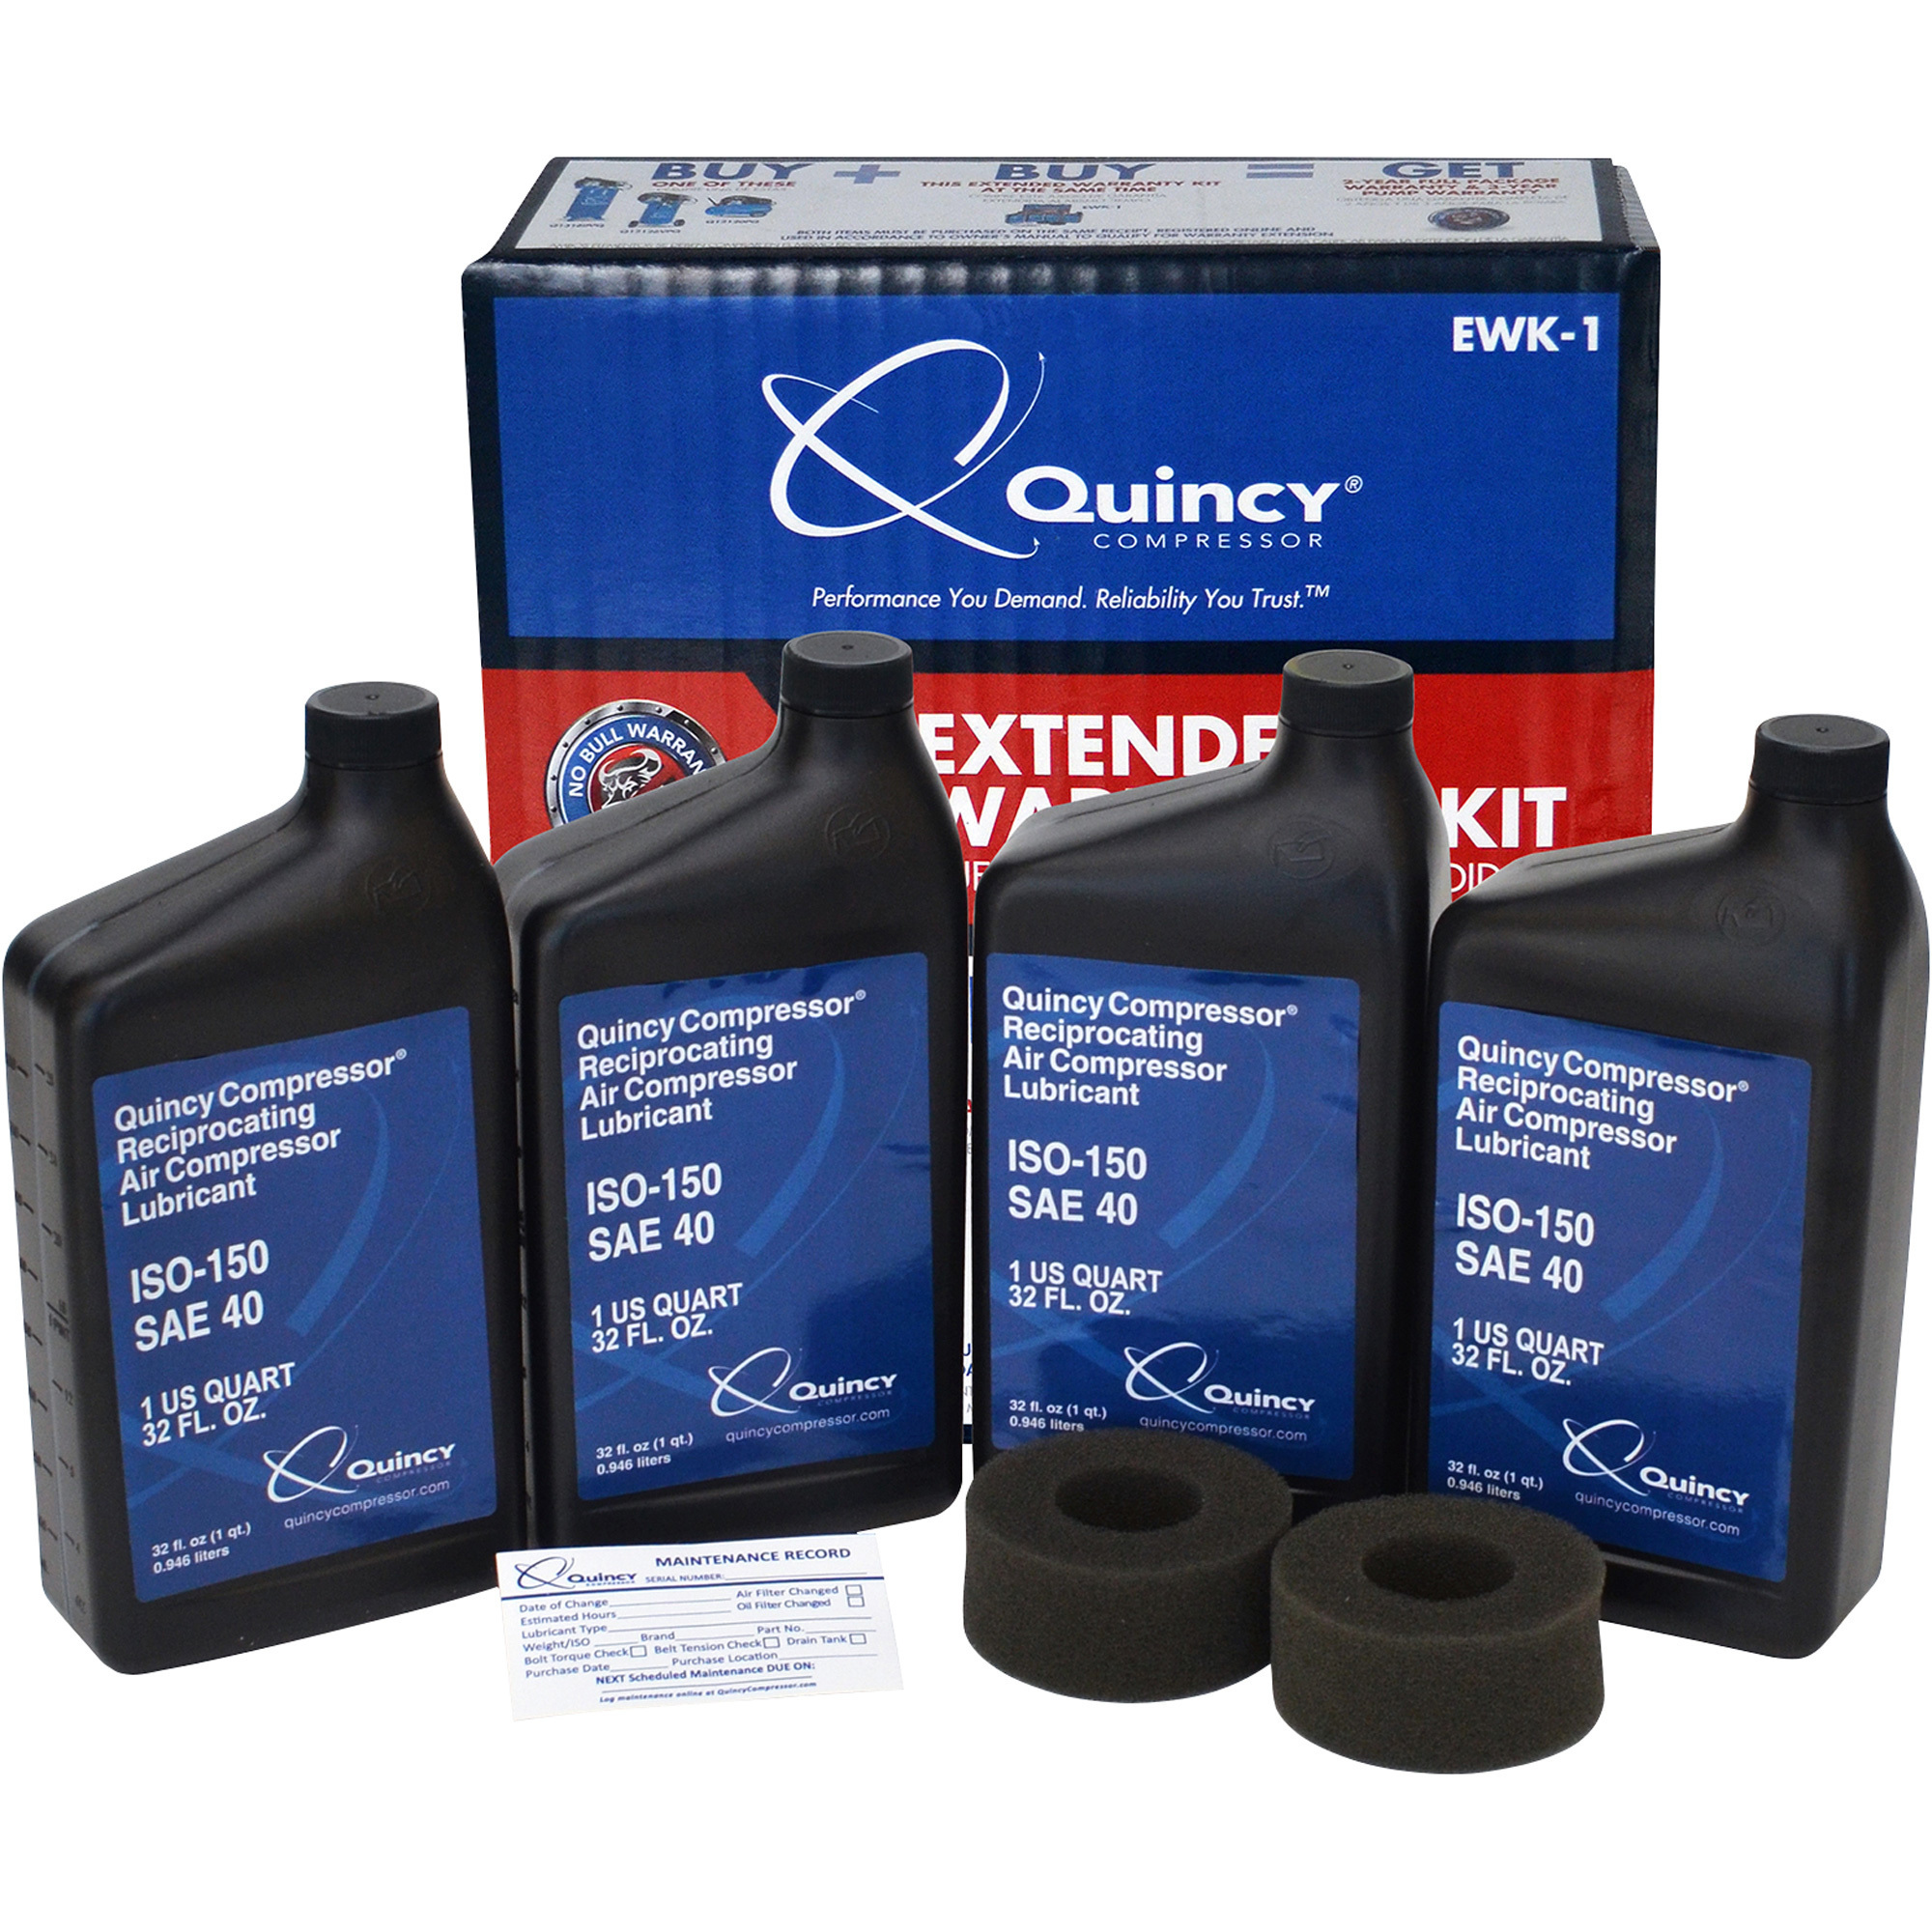 Quincy Extended Support and Maintenance Kit for Quincy Single Stage Compressors, Model EWK-1